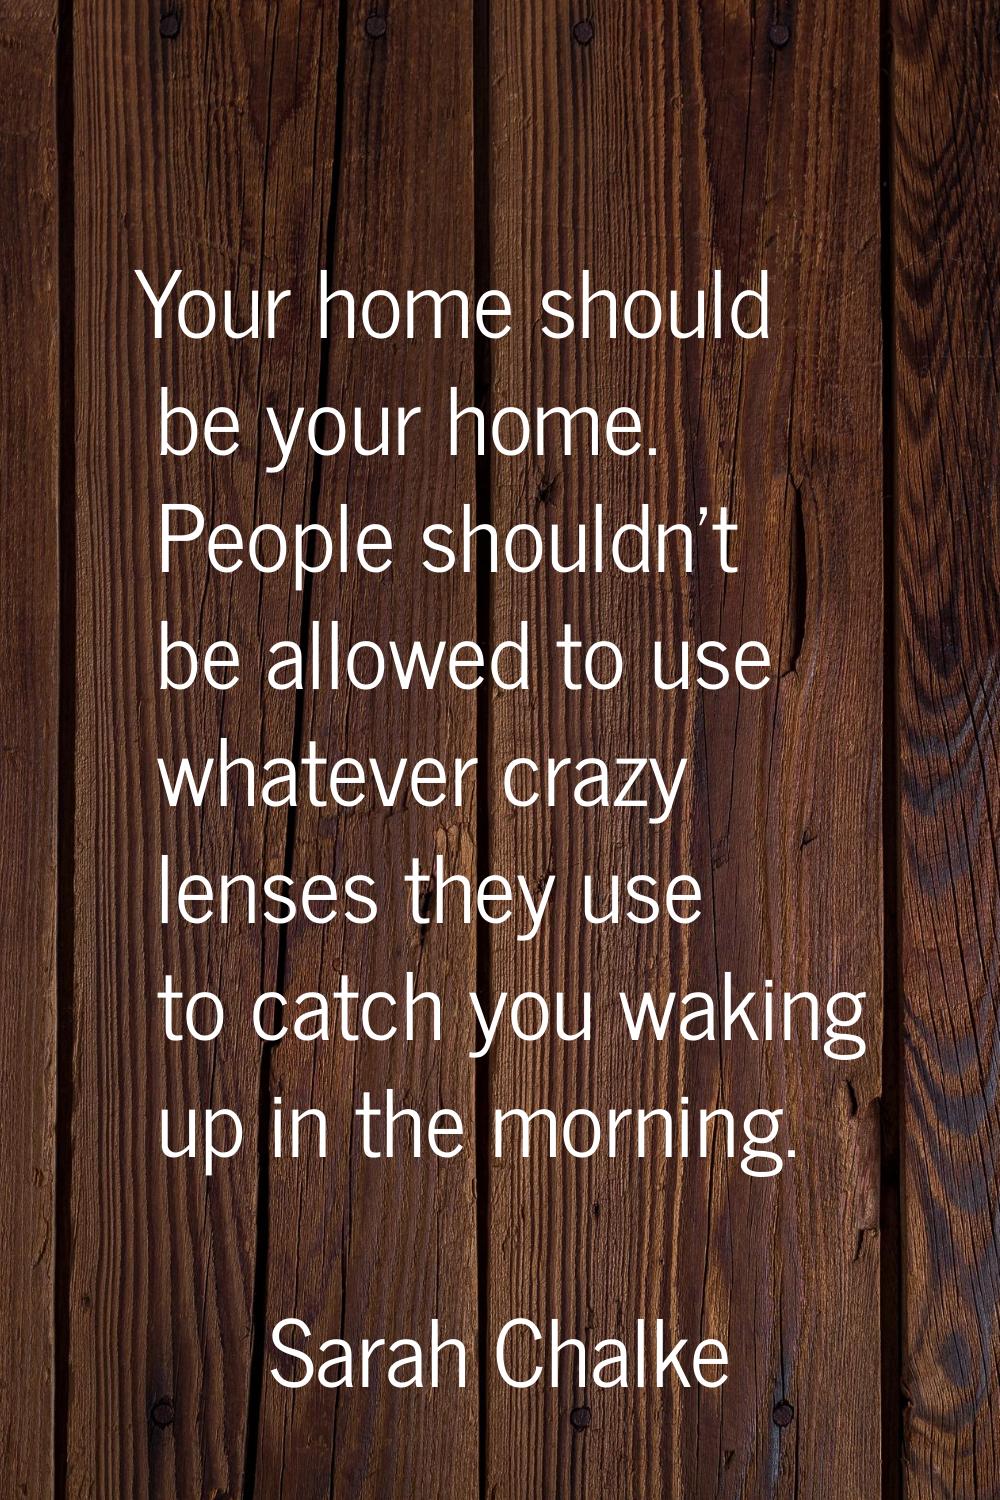 Your home should be your home. People shouldn't be allowed to use whatever crazy lenses they use to